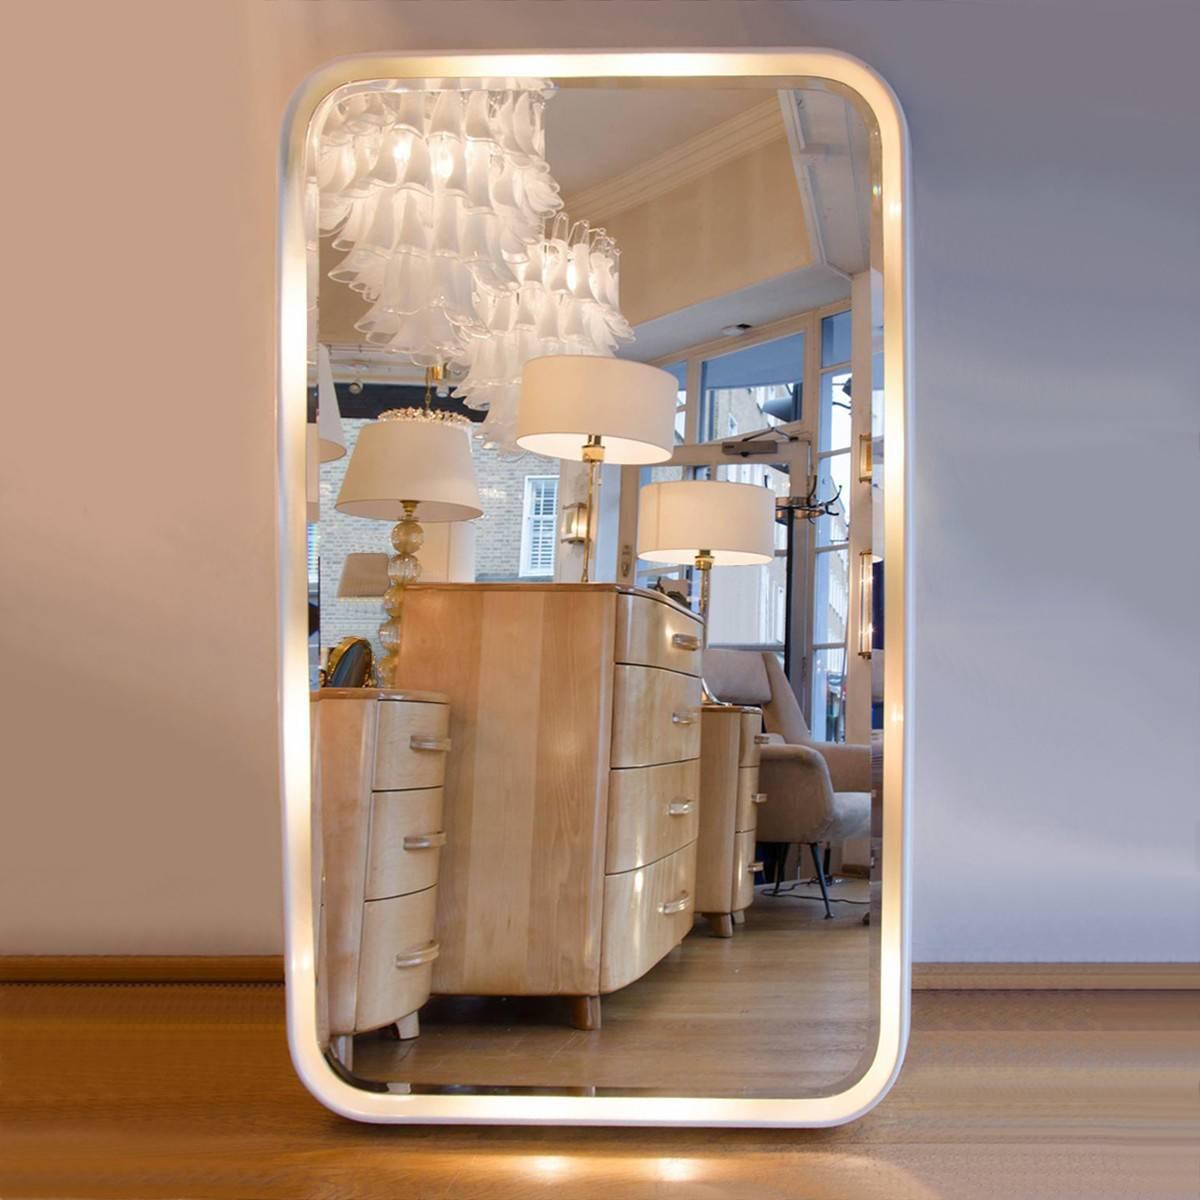 Larger than life – white laminated wall mirror with integral lighting.
Can be hung vertically or horizontally.